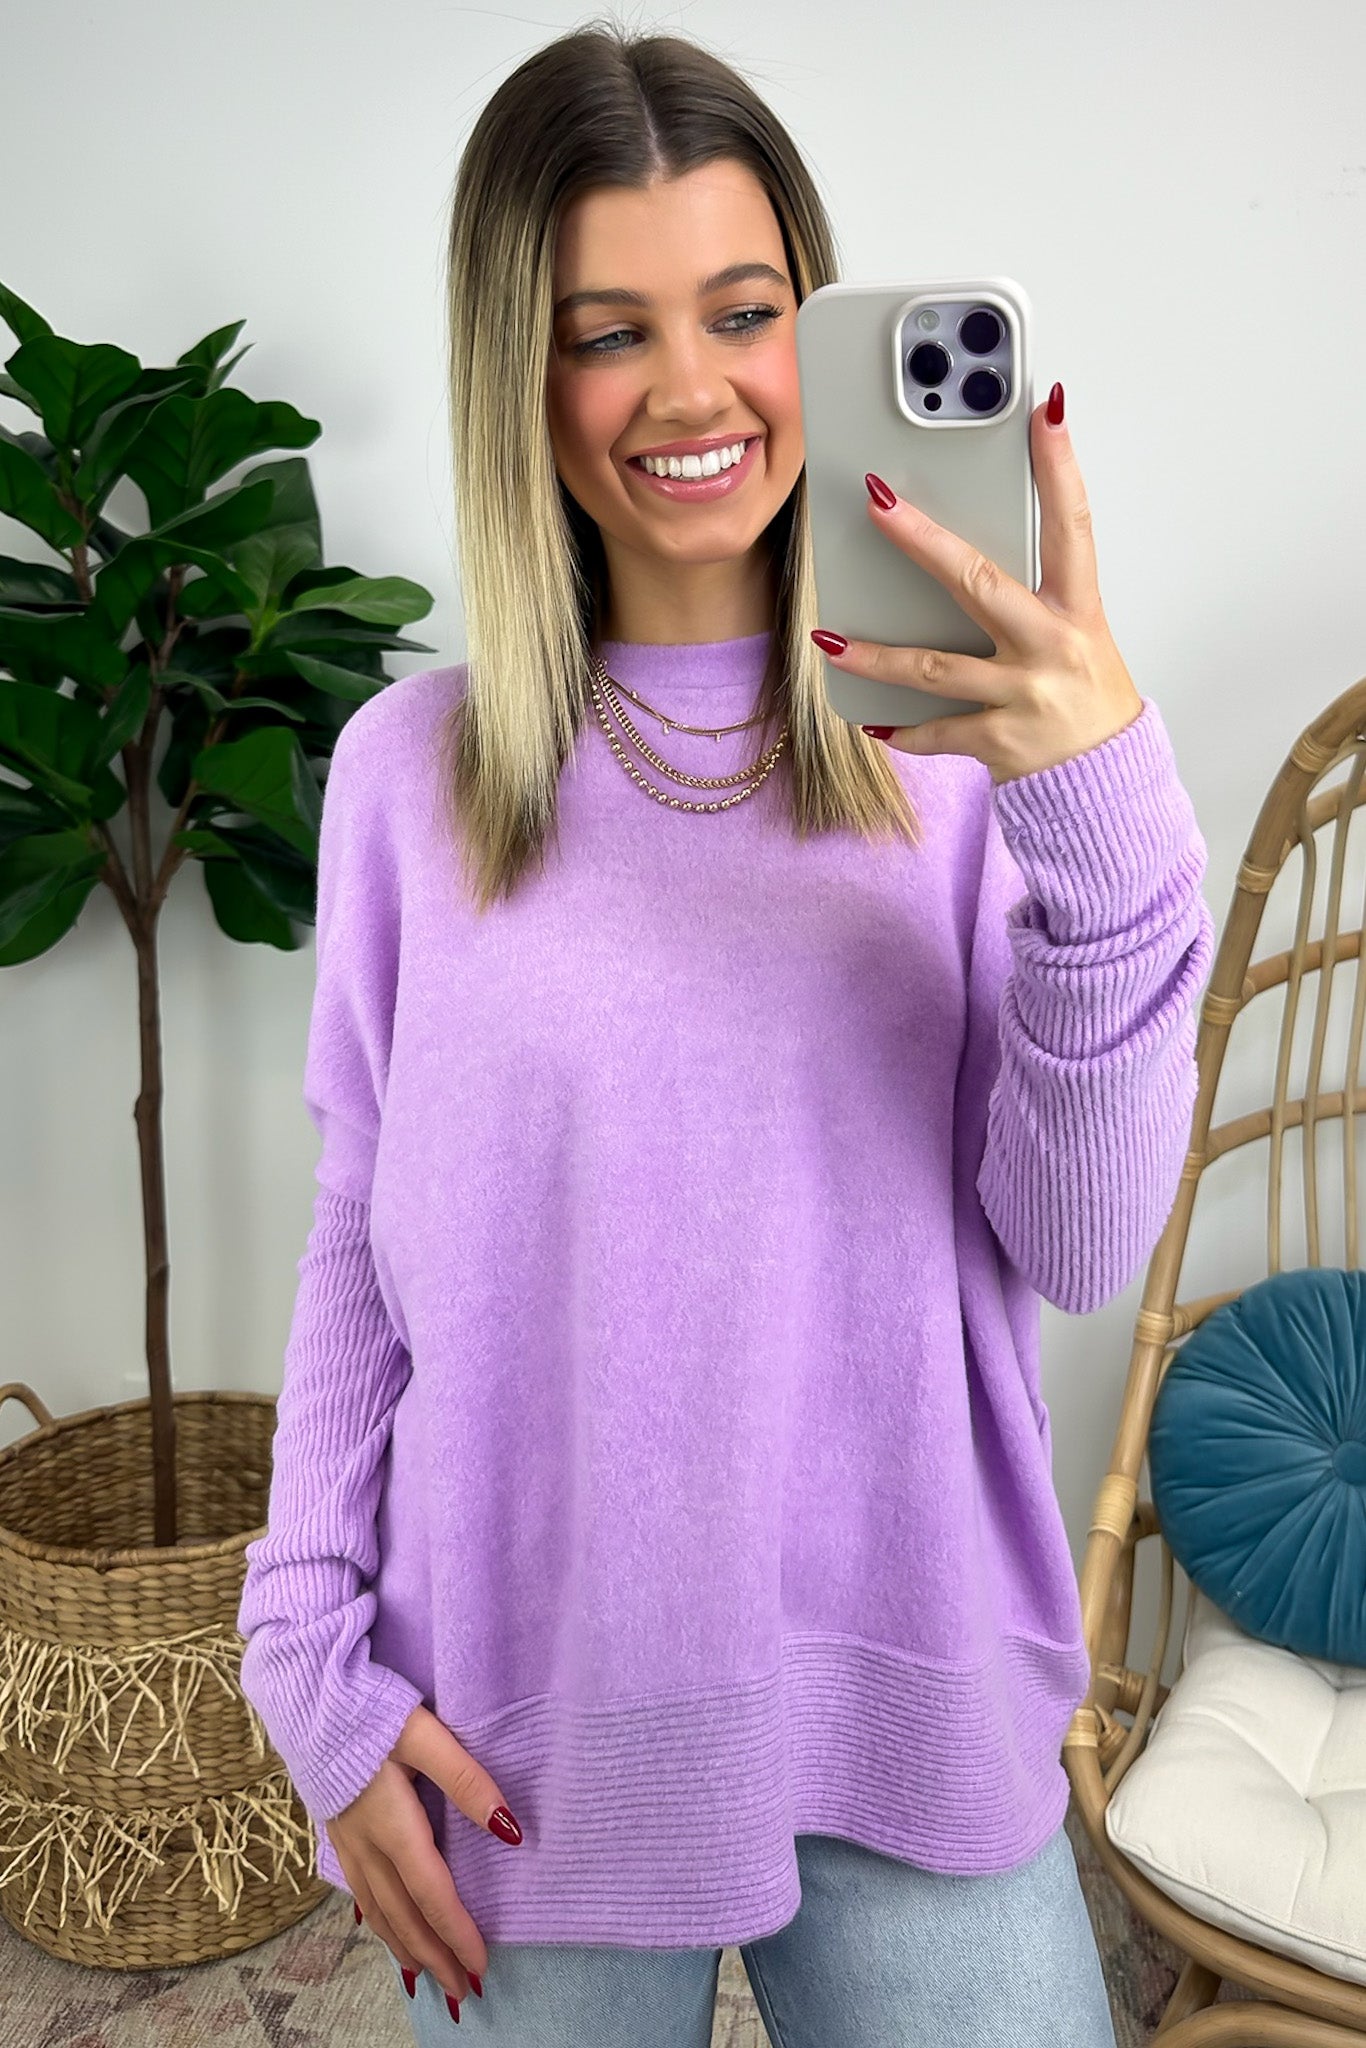 Plum Ribbed Sweater by TOME Collective for $30